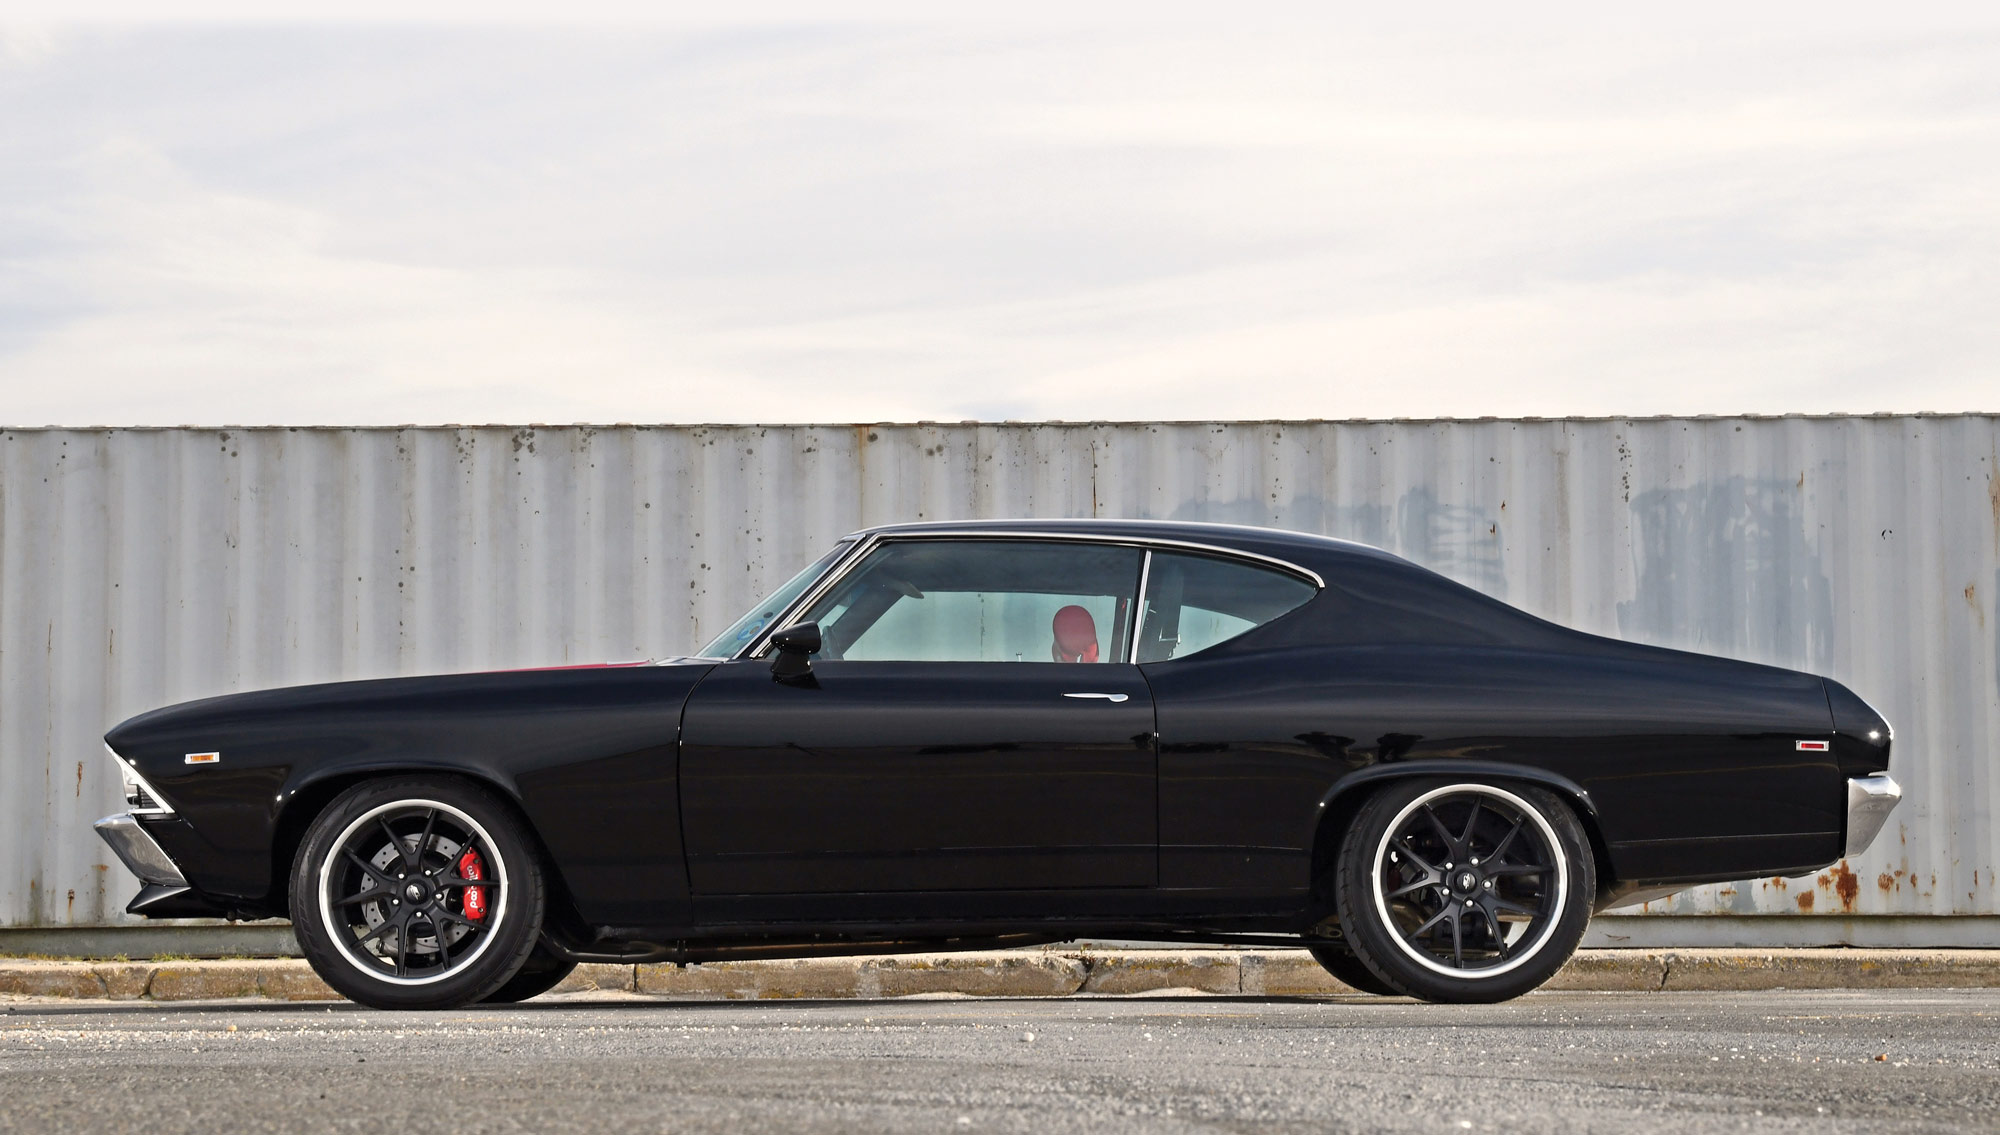 Side view of the 1969 Chevelle